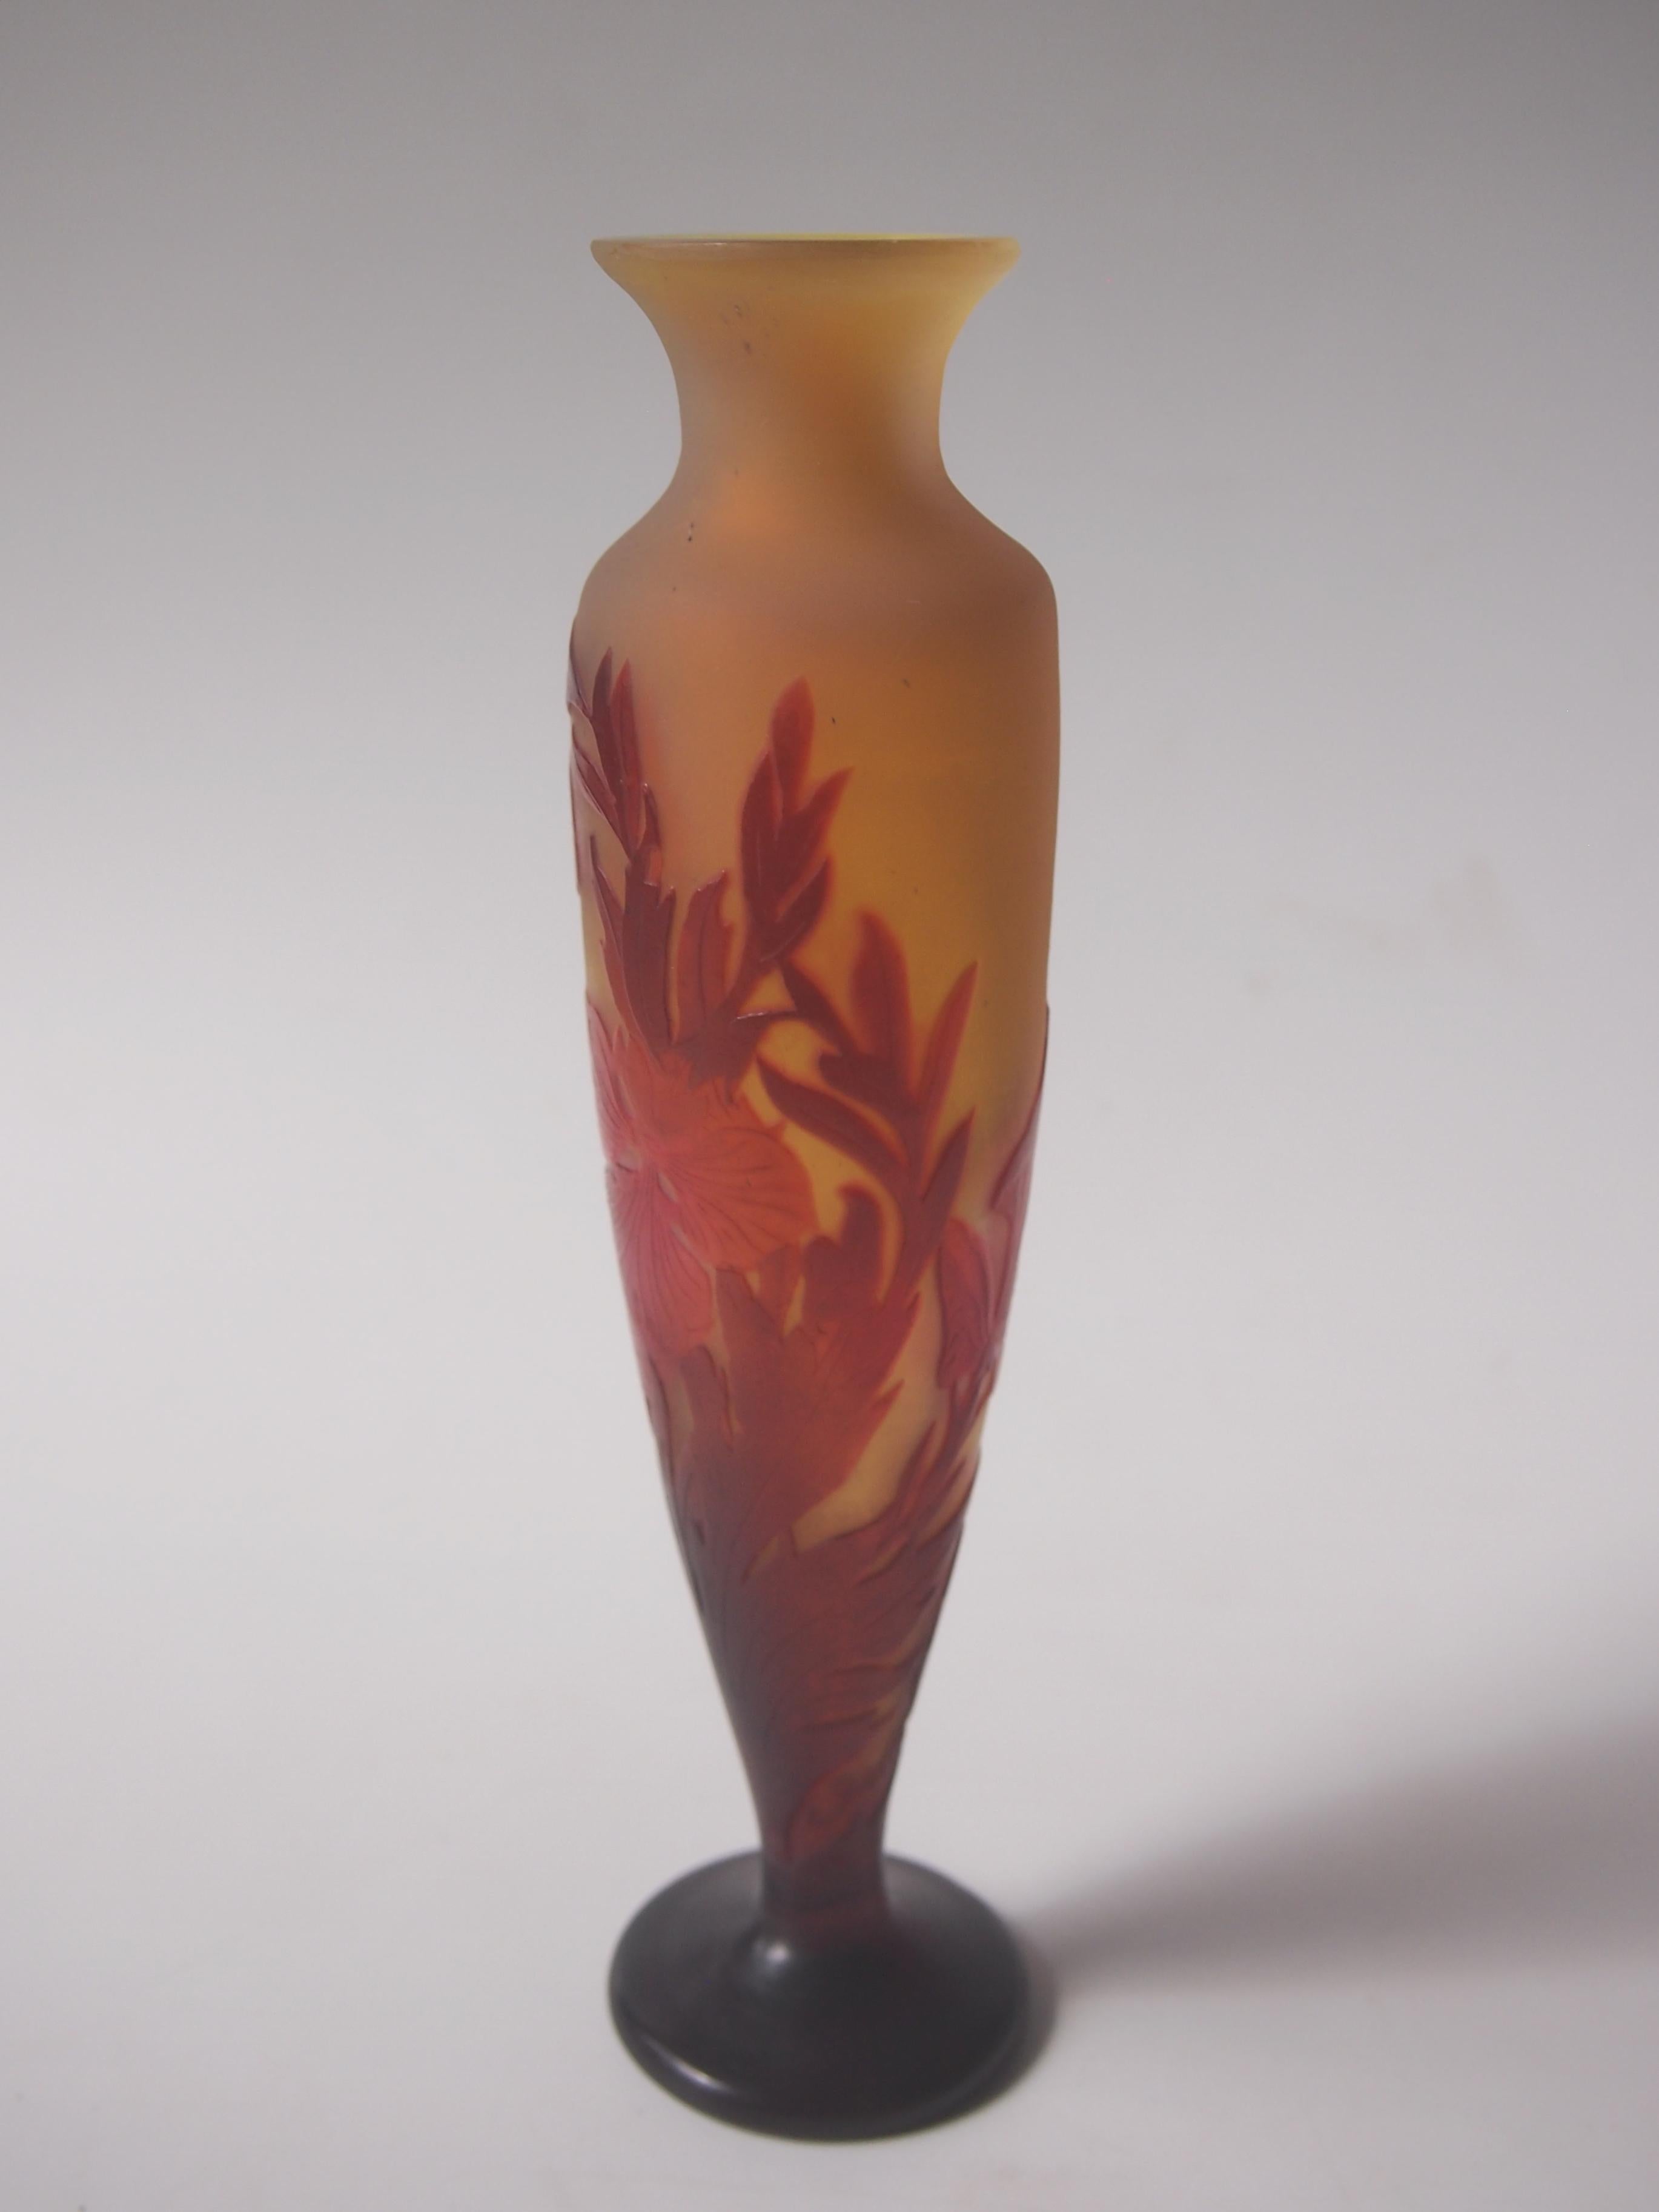 Fine small signed French Art Nouveau Emile Galle footed cameo vase depicting flowers in reds over orange -with fine internal polishing to highlight the red in the flowers -(this is sometimes called window pane technique one of the more complex